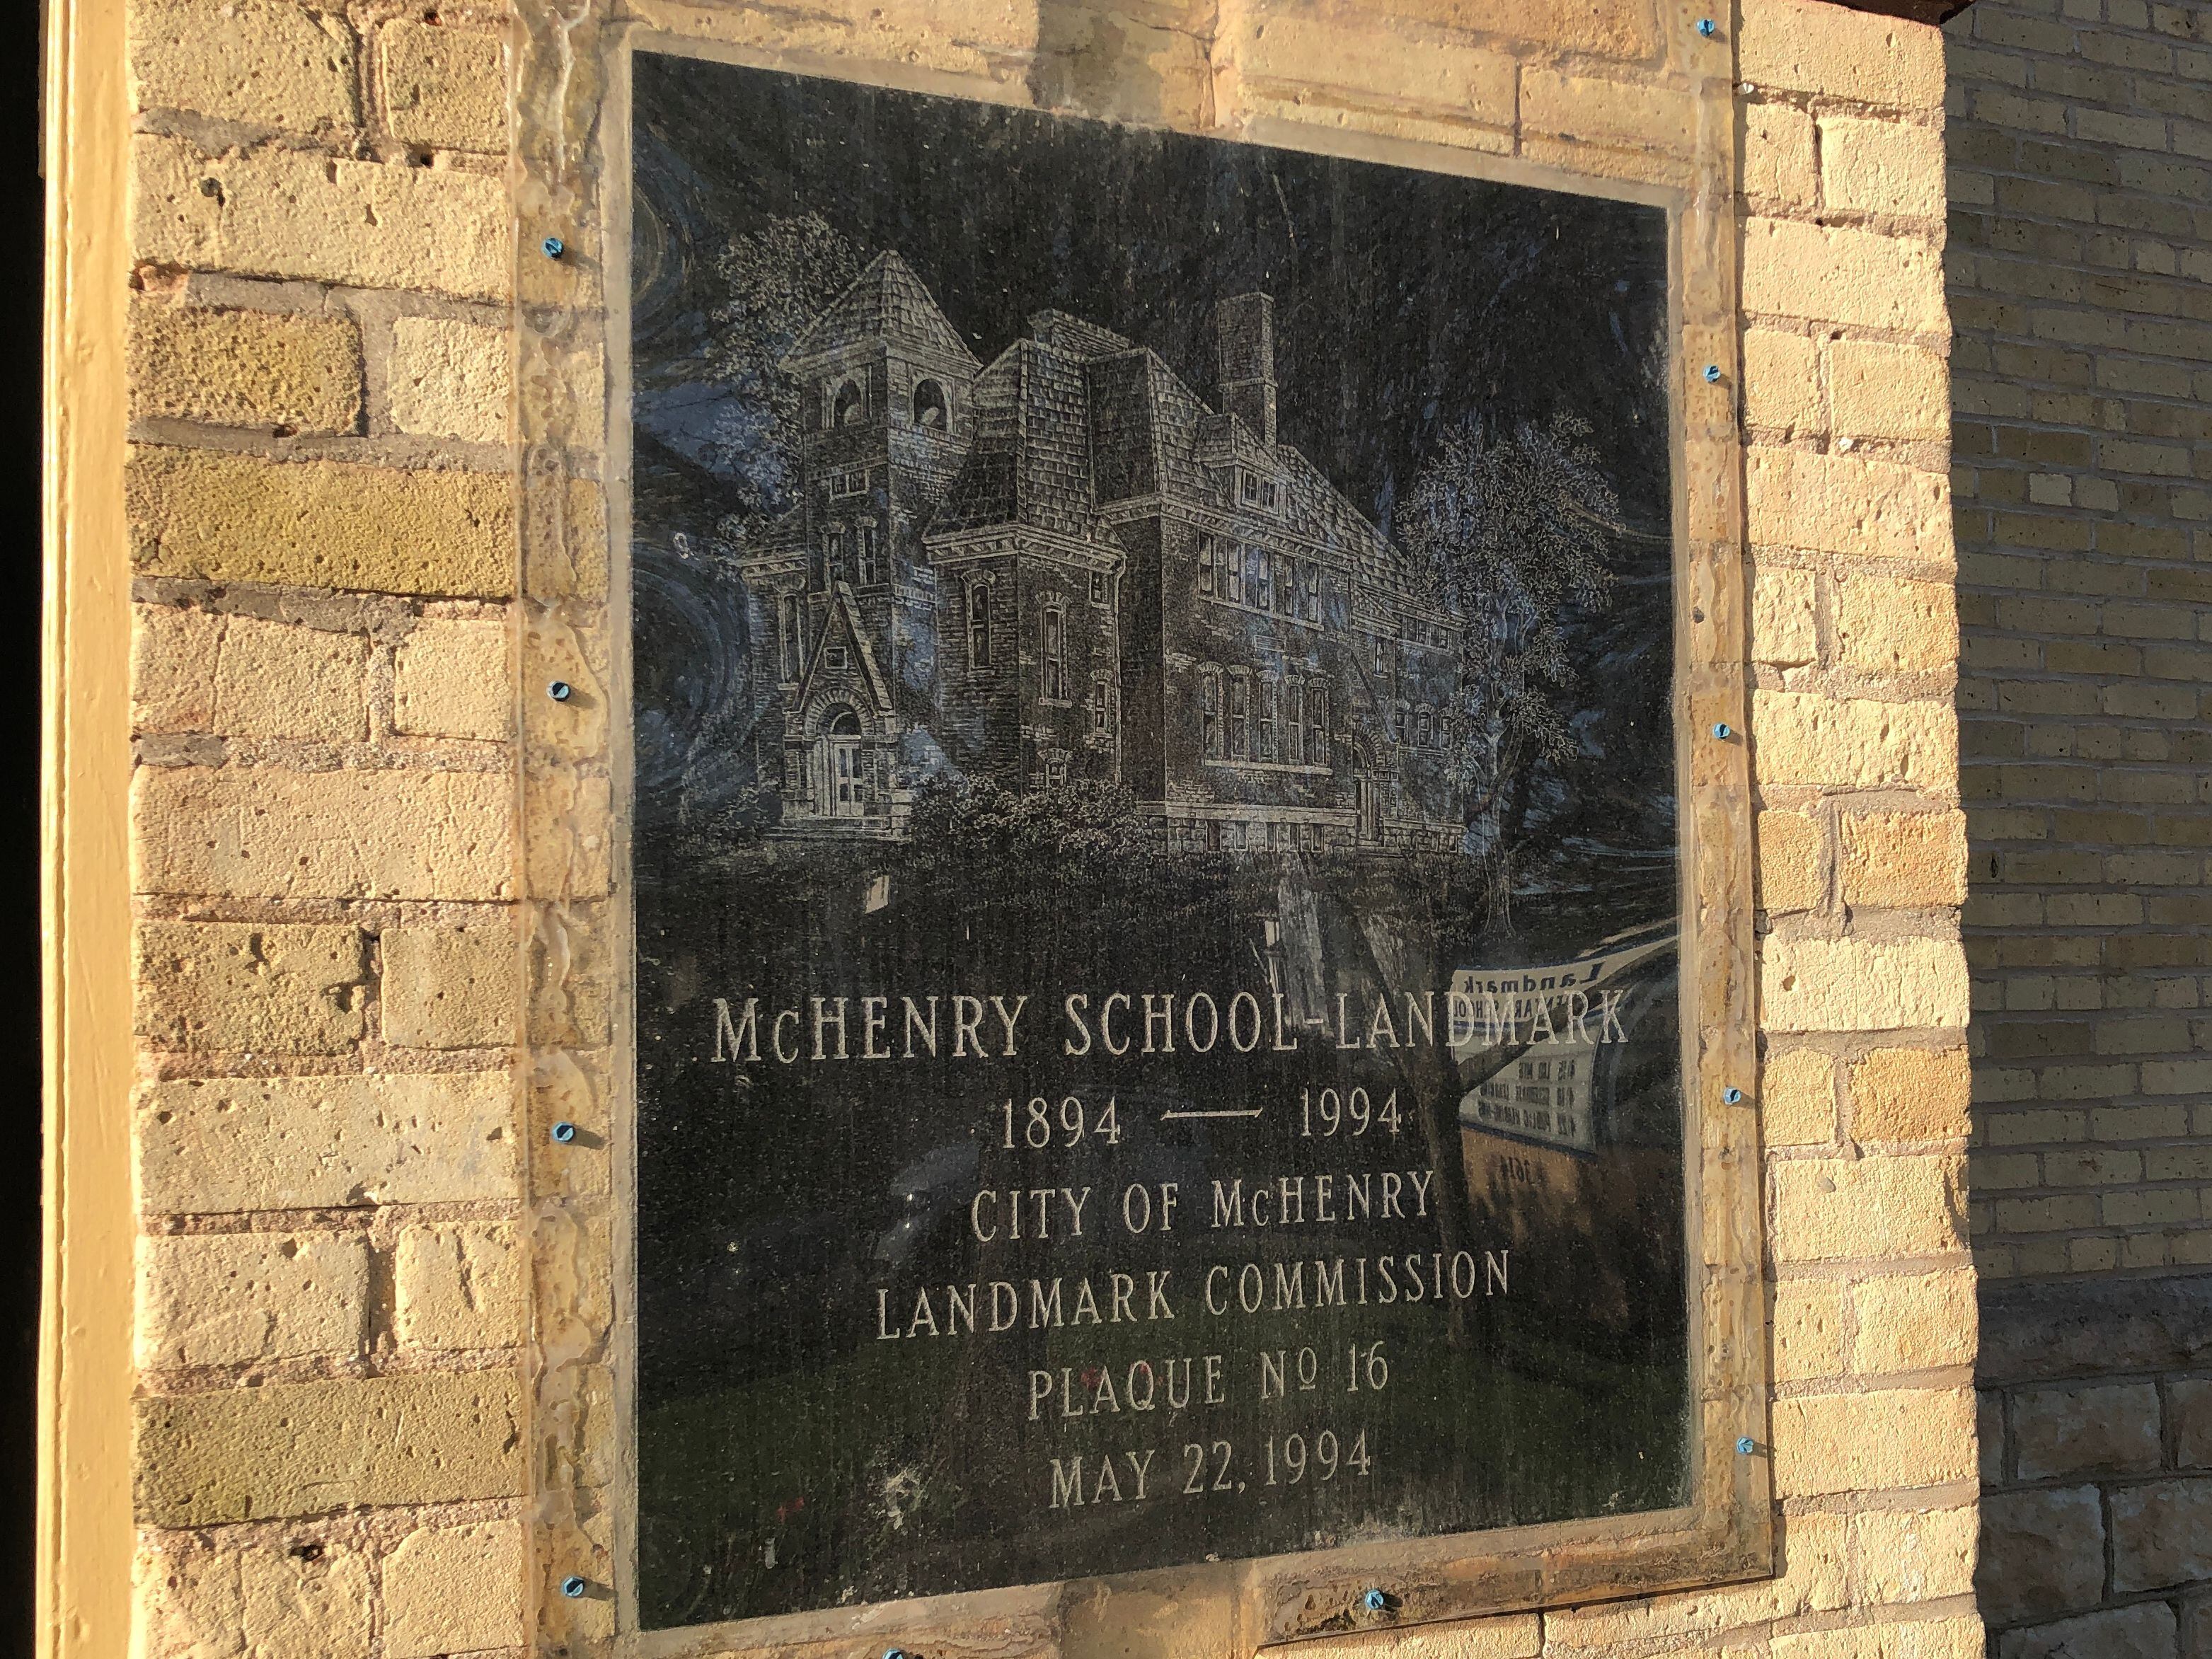 The city of McHenry placed a plaque on the school noting its history in the community in 1994, in recognition of the building's 100th birthday and seen here 30 years later, on Monday, April 15, 2024.